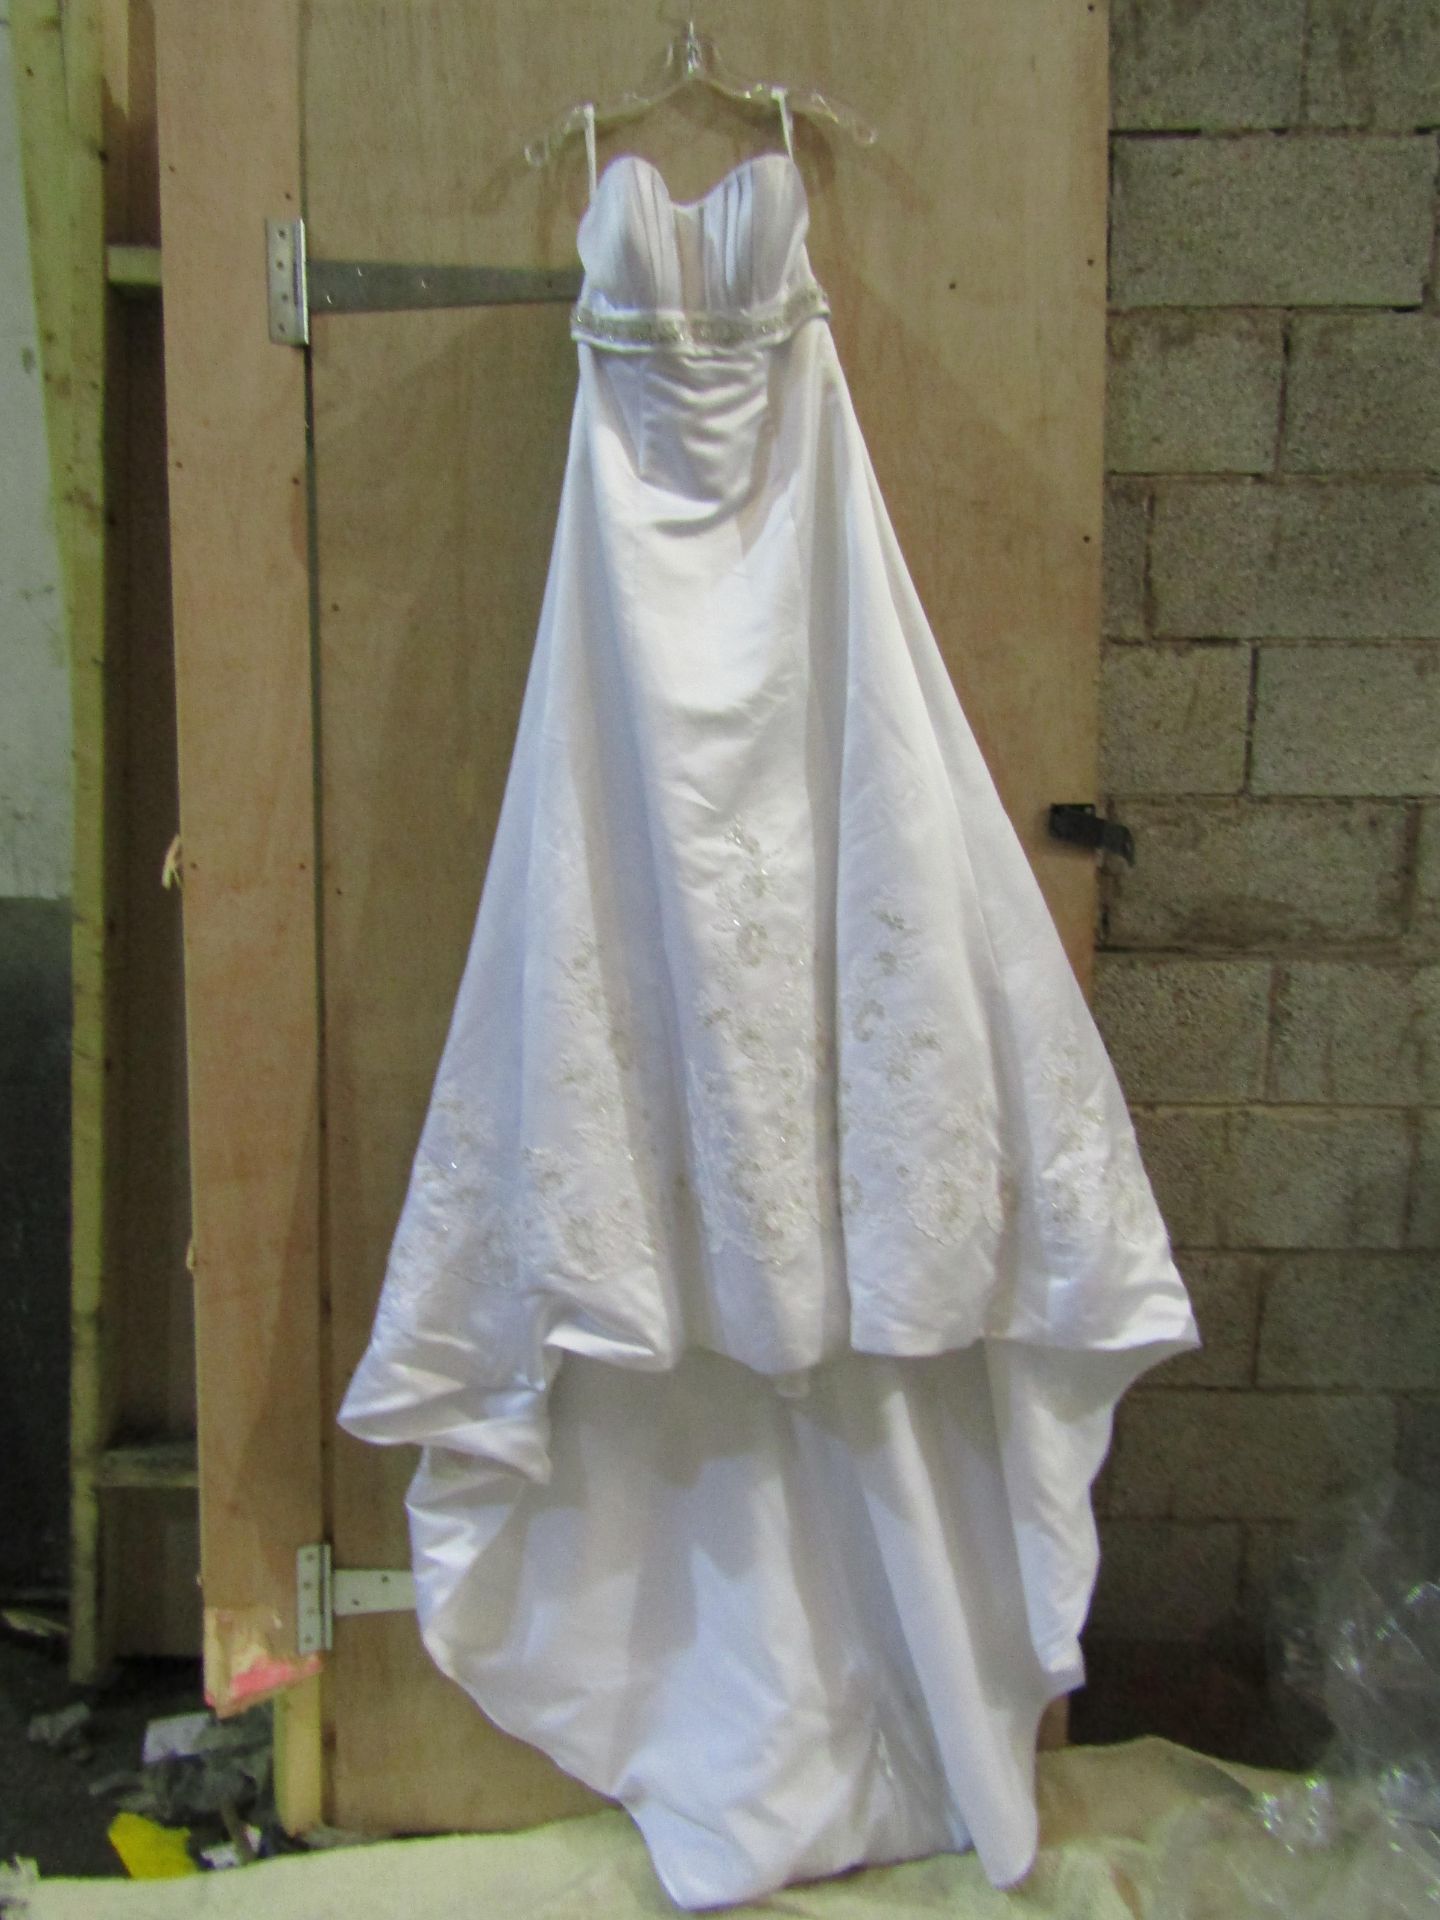 Approx 500 pieces of wedding shop stock to include wedding dresses, mother of the bride, dresses, - Image 37 of 43